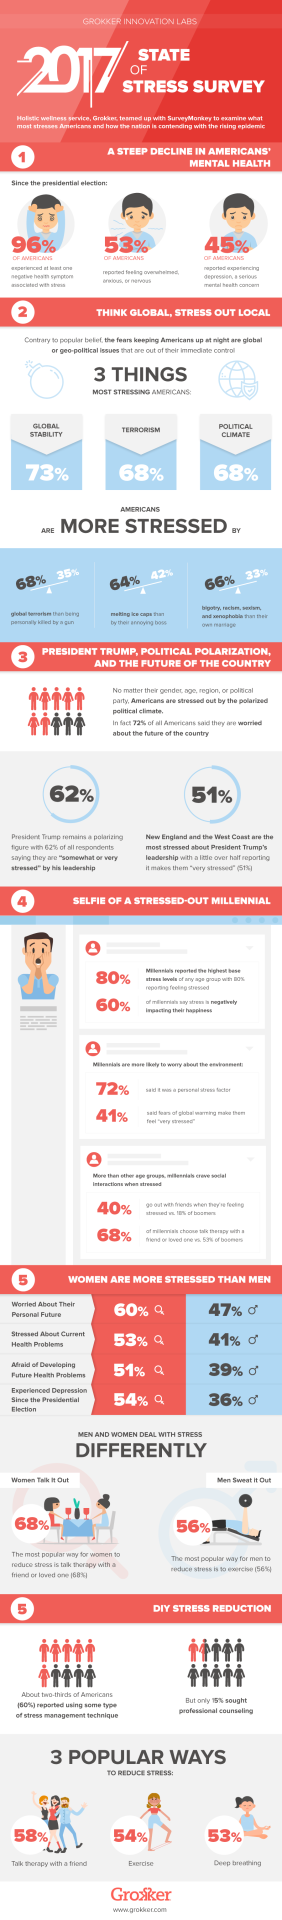 Stress in america infographic